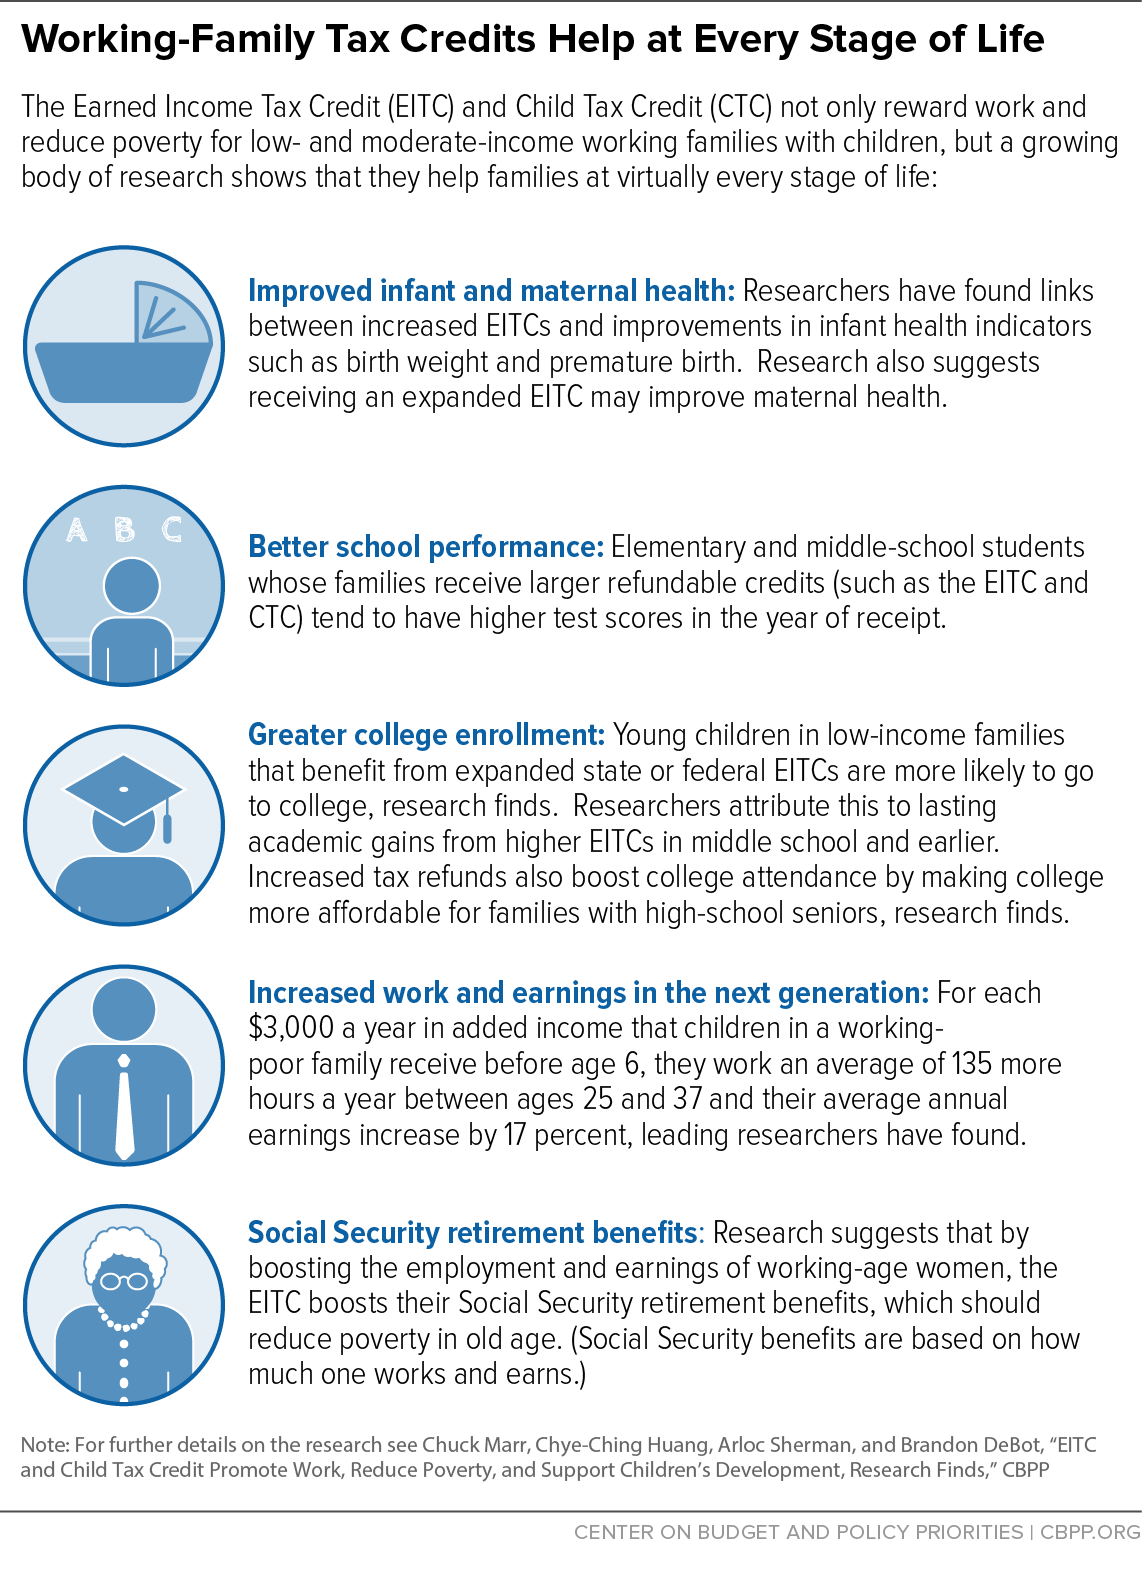 eitc and child tax credit promote work, reduce poverty, and support